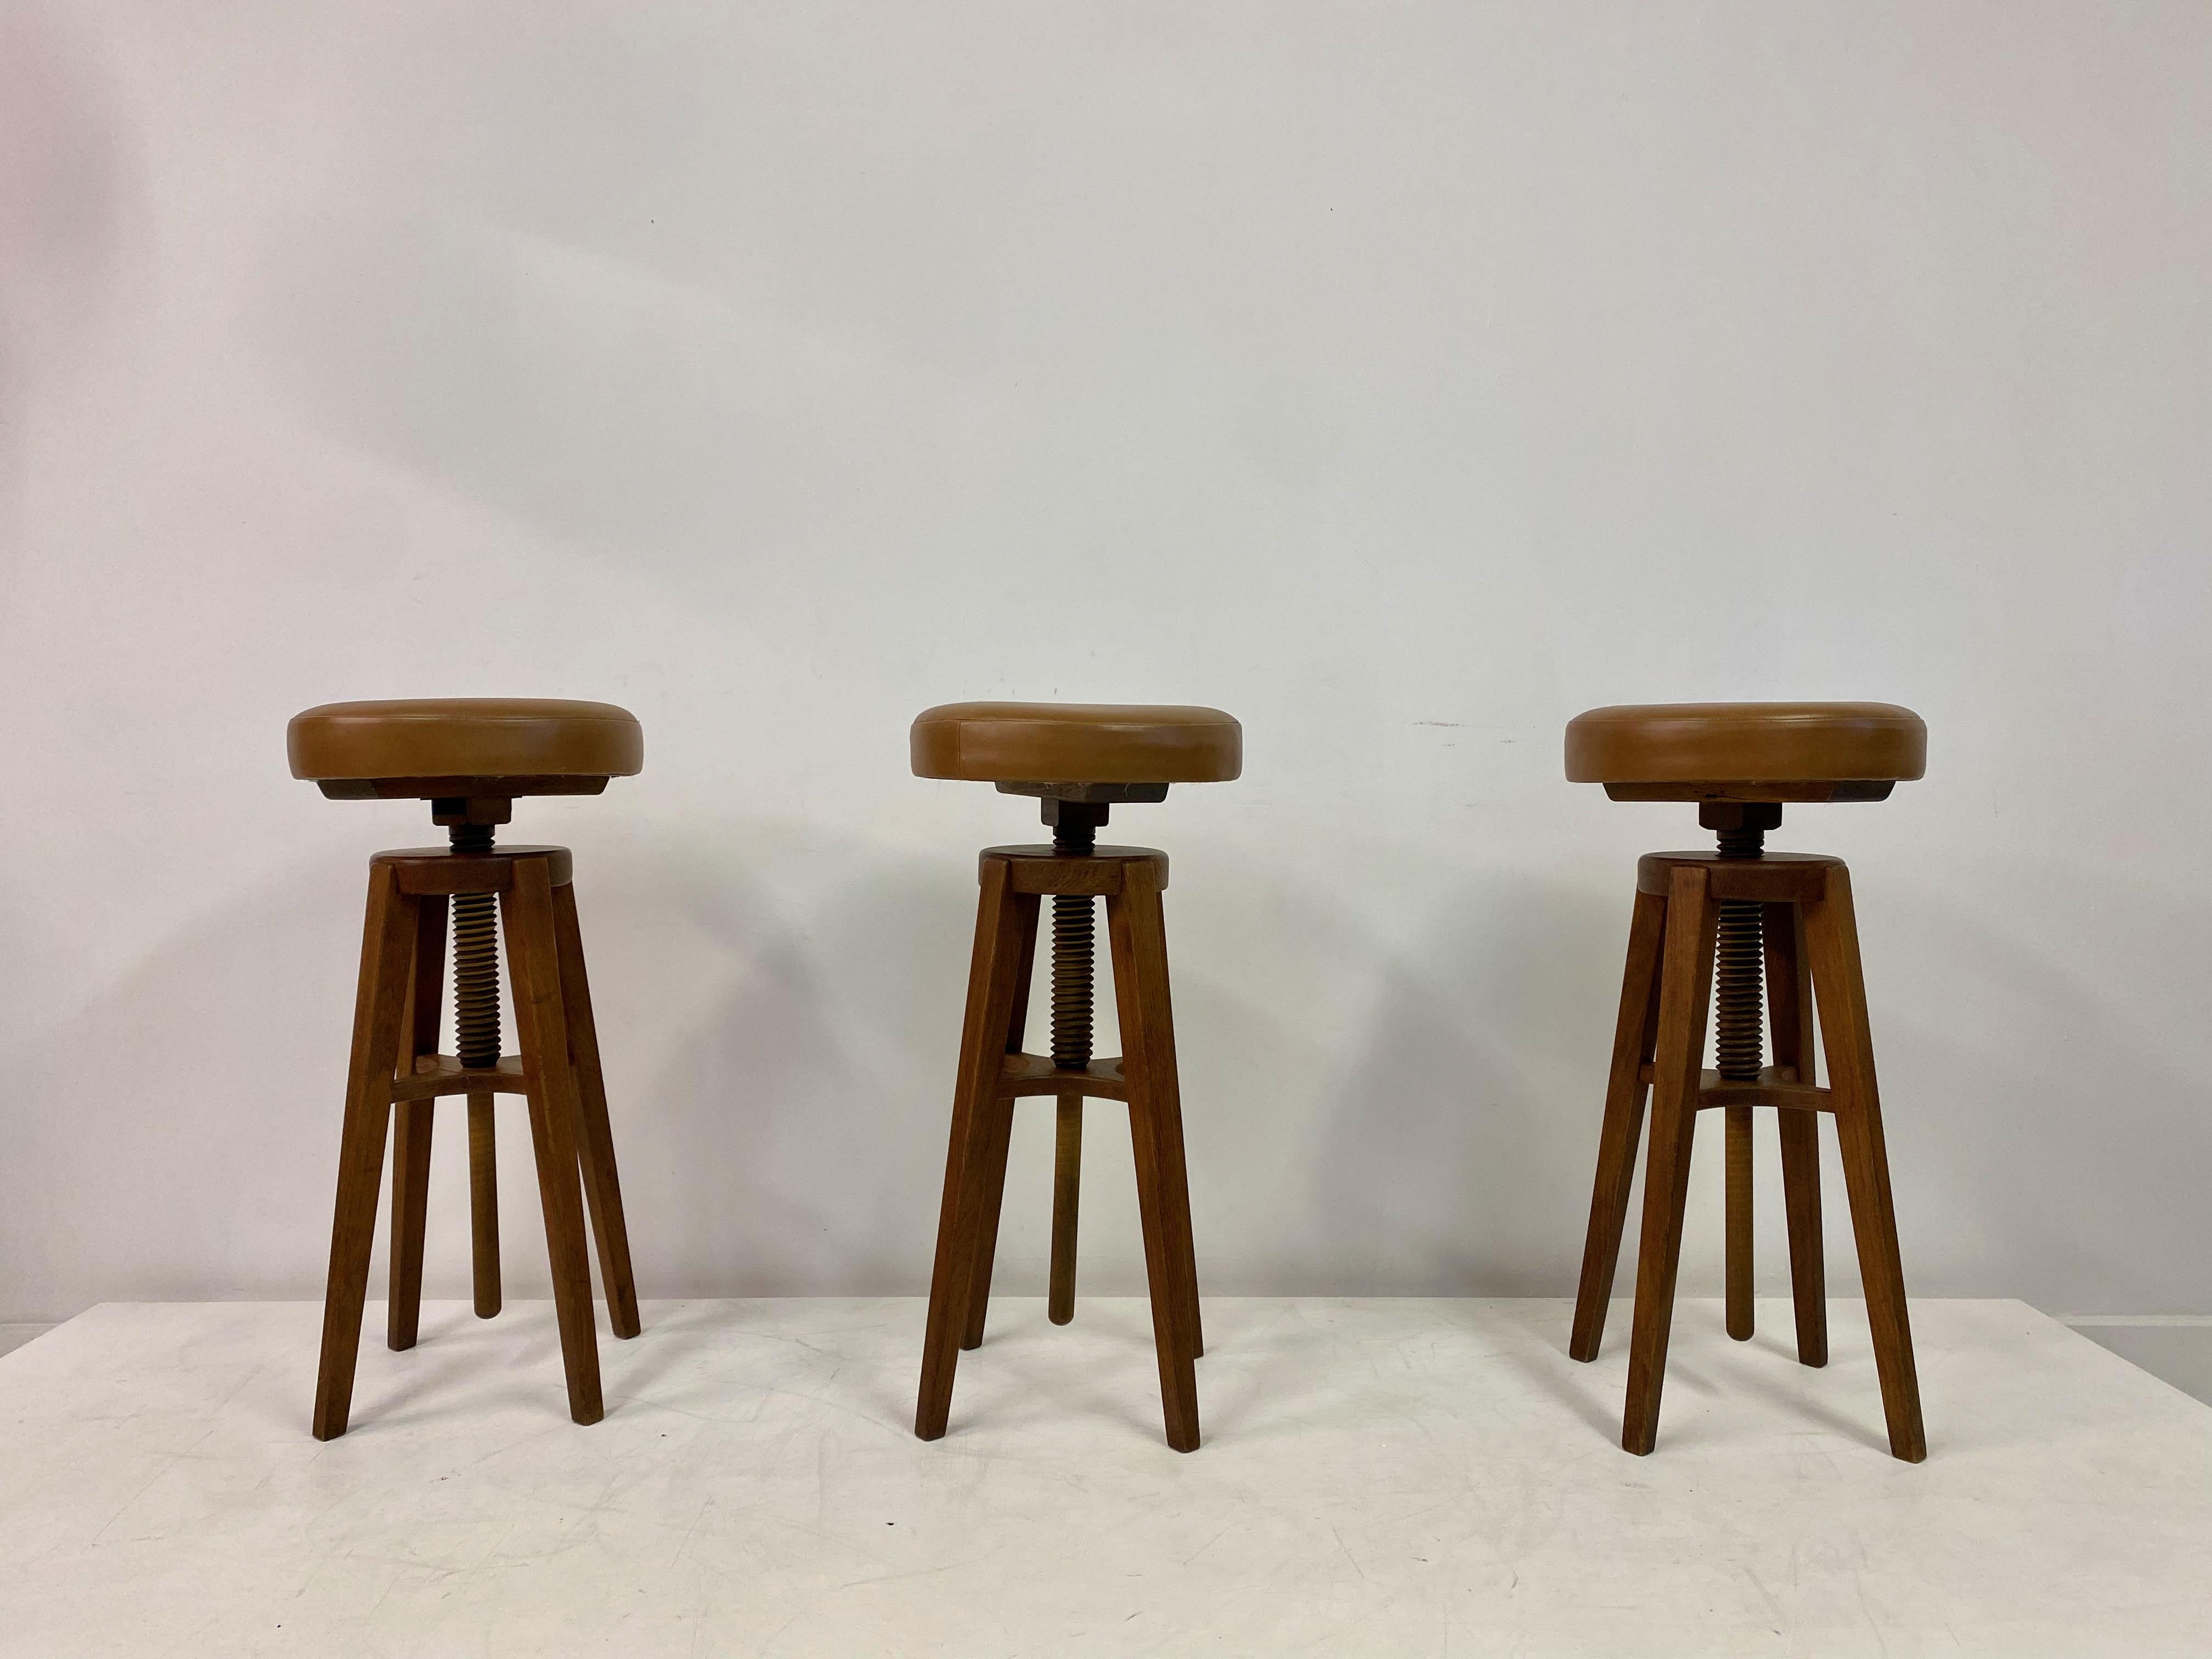 Set of three stools

Oak and beech frame

New tan leather seats

Adjustable height

Can extend to 94cm

Denmark 1940s.